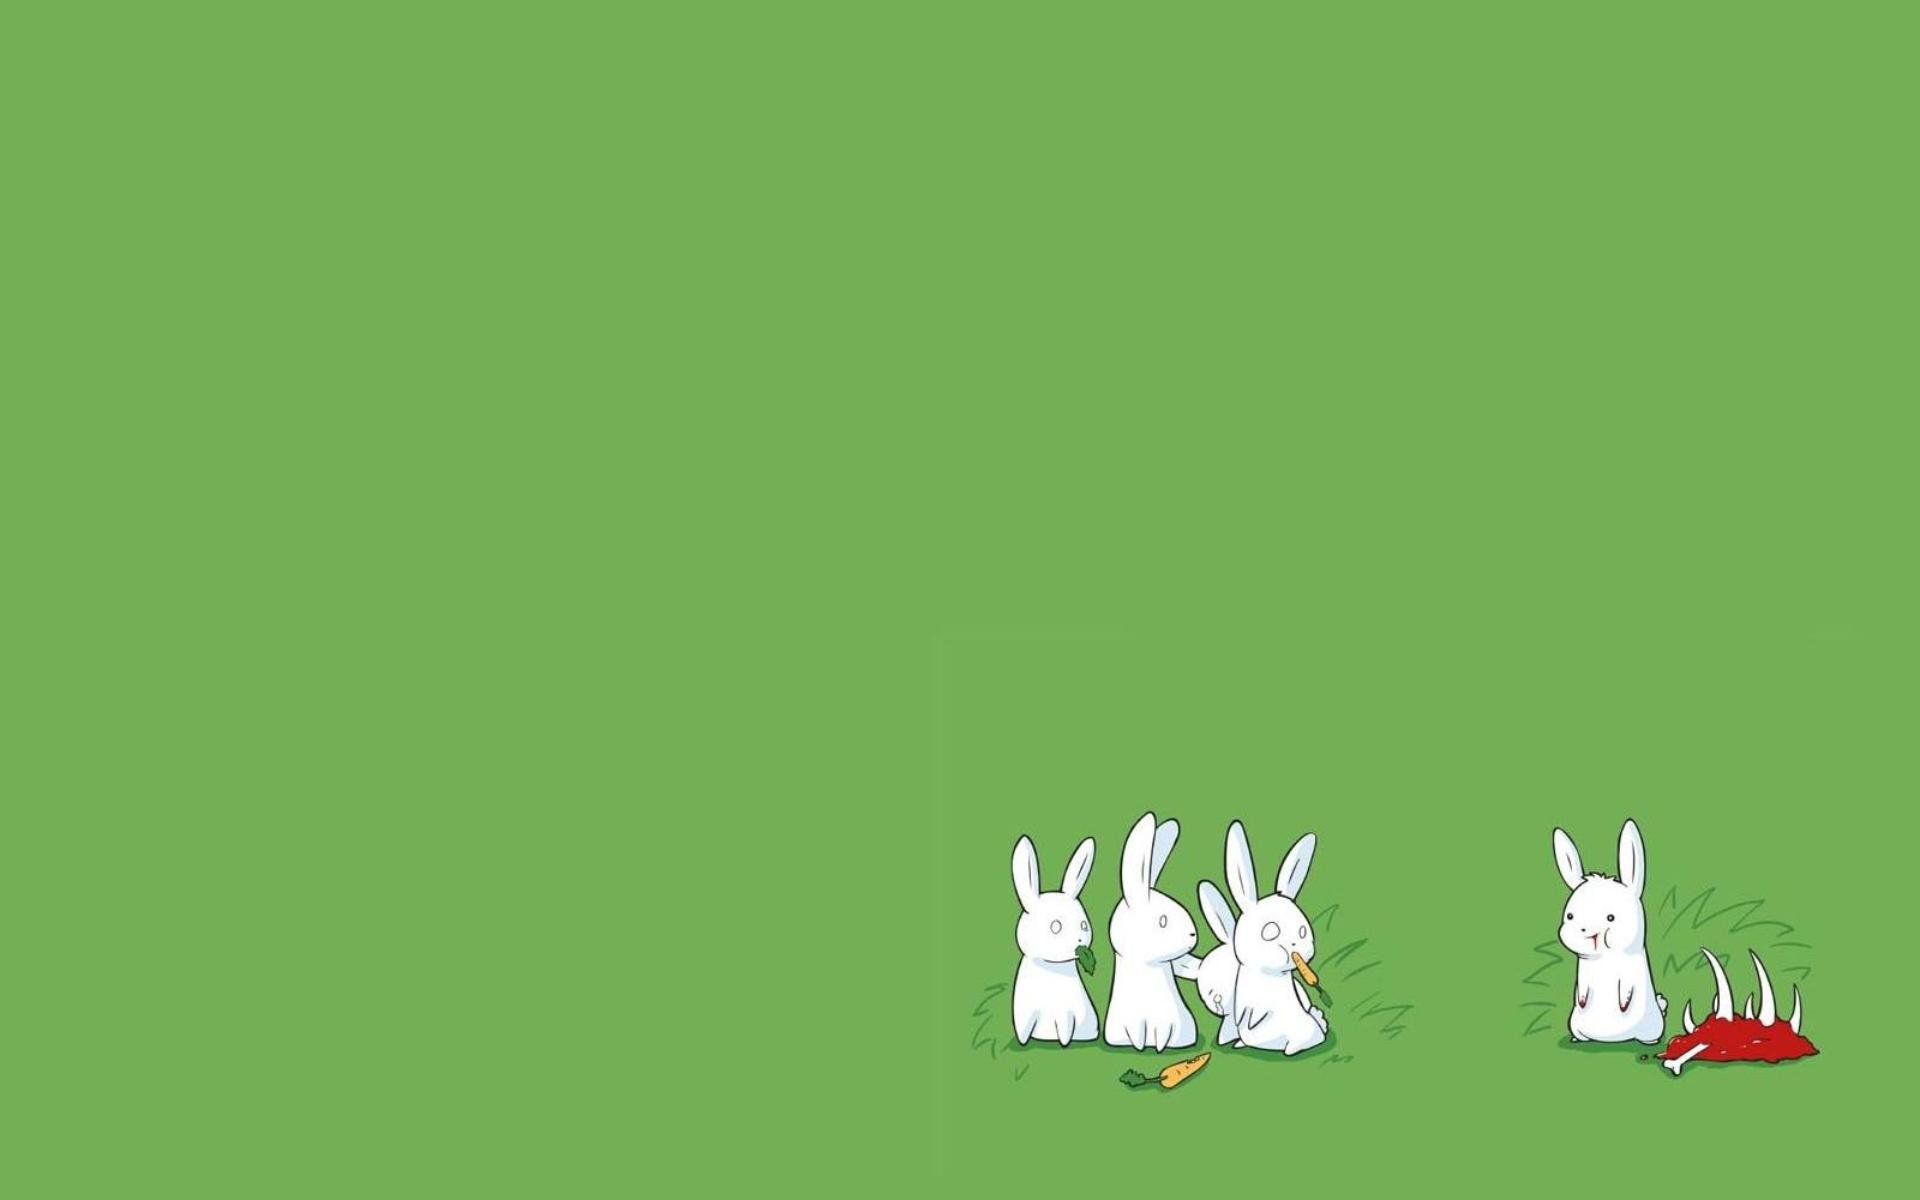 bunnies, Minimalistic, Drawings, Simple, Background, Simple, Green, Background Wallpaper